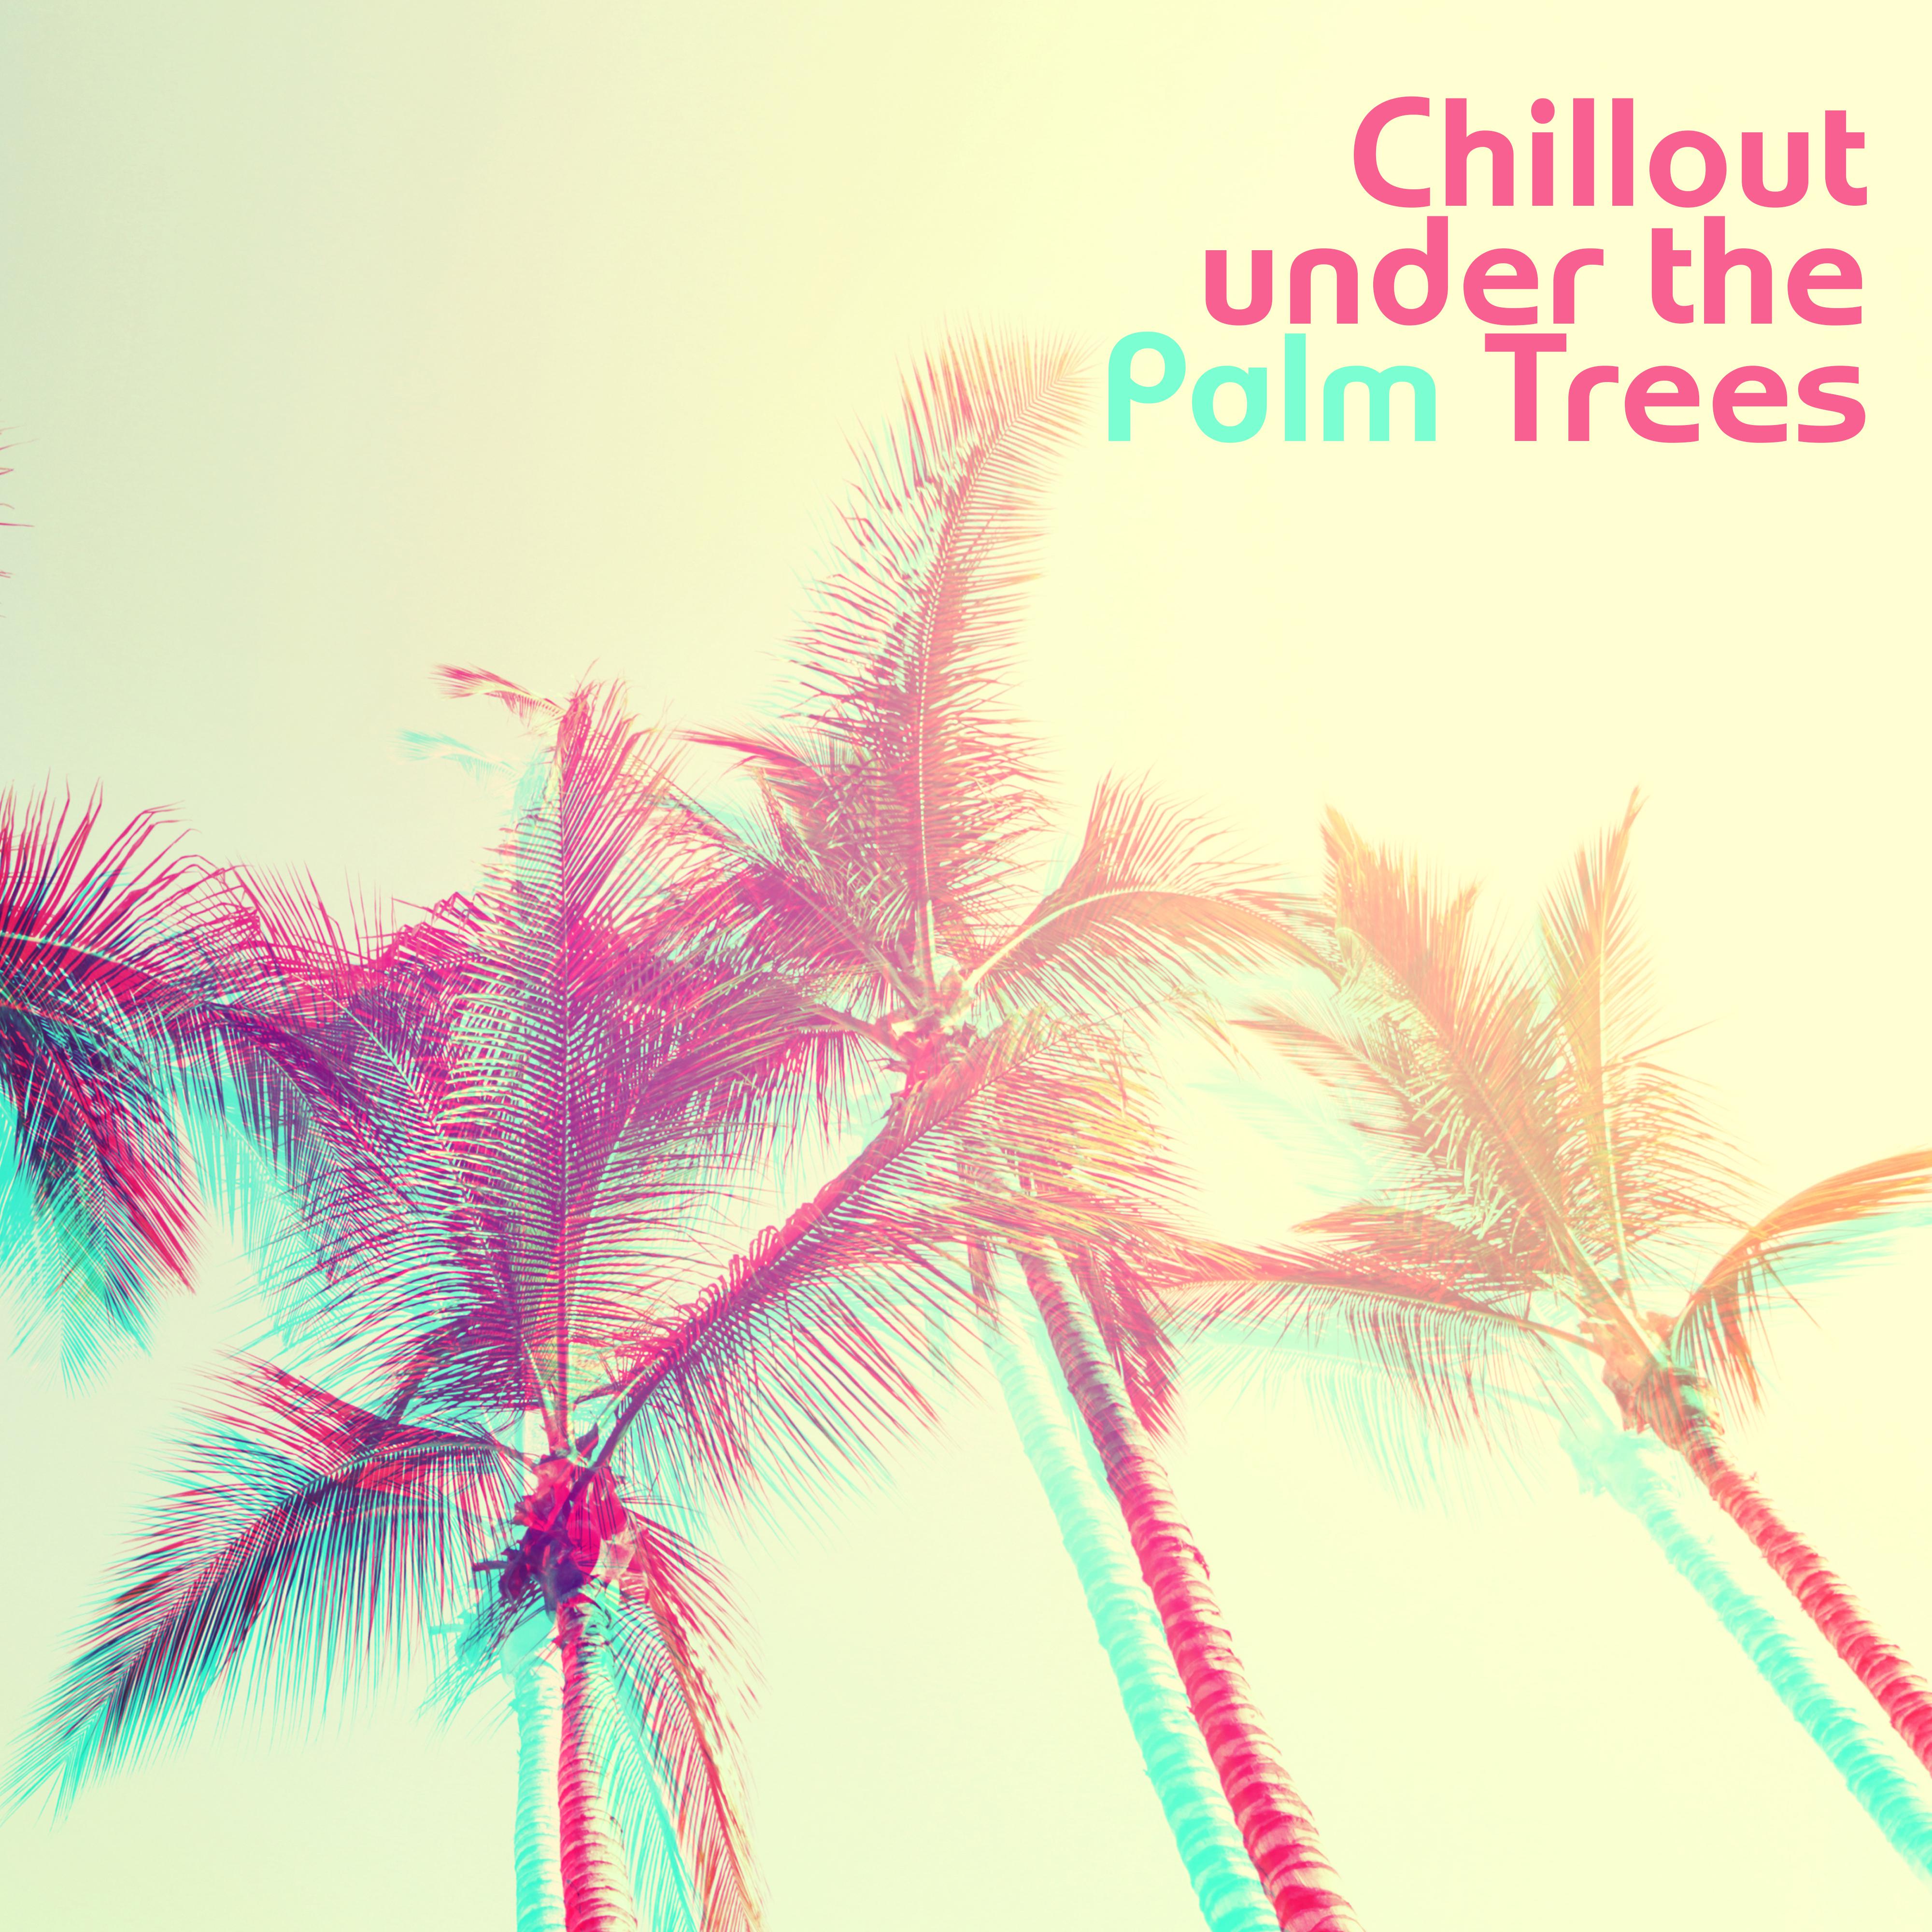 Chillout under the Palm Trees: Rest, Relax and Unwind with Chillout Music 2019